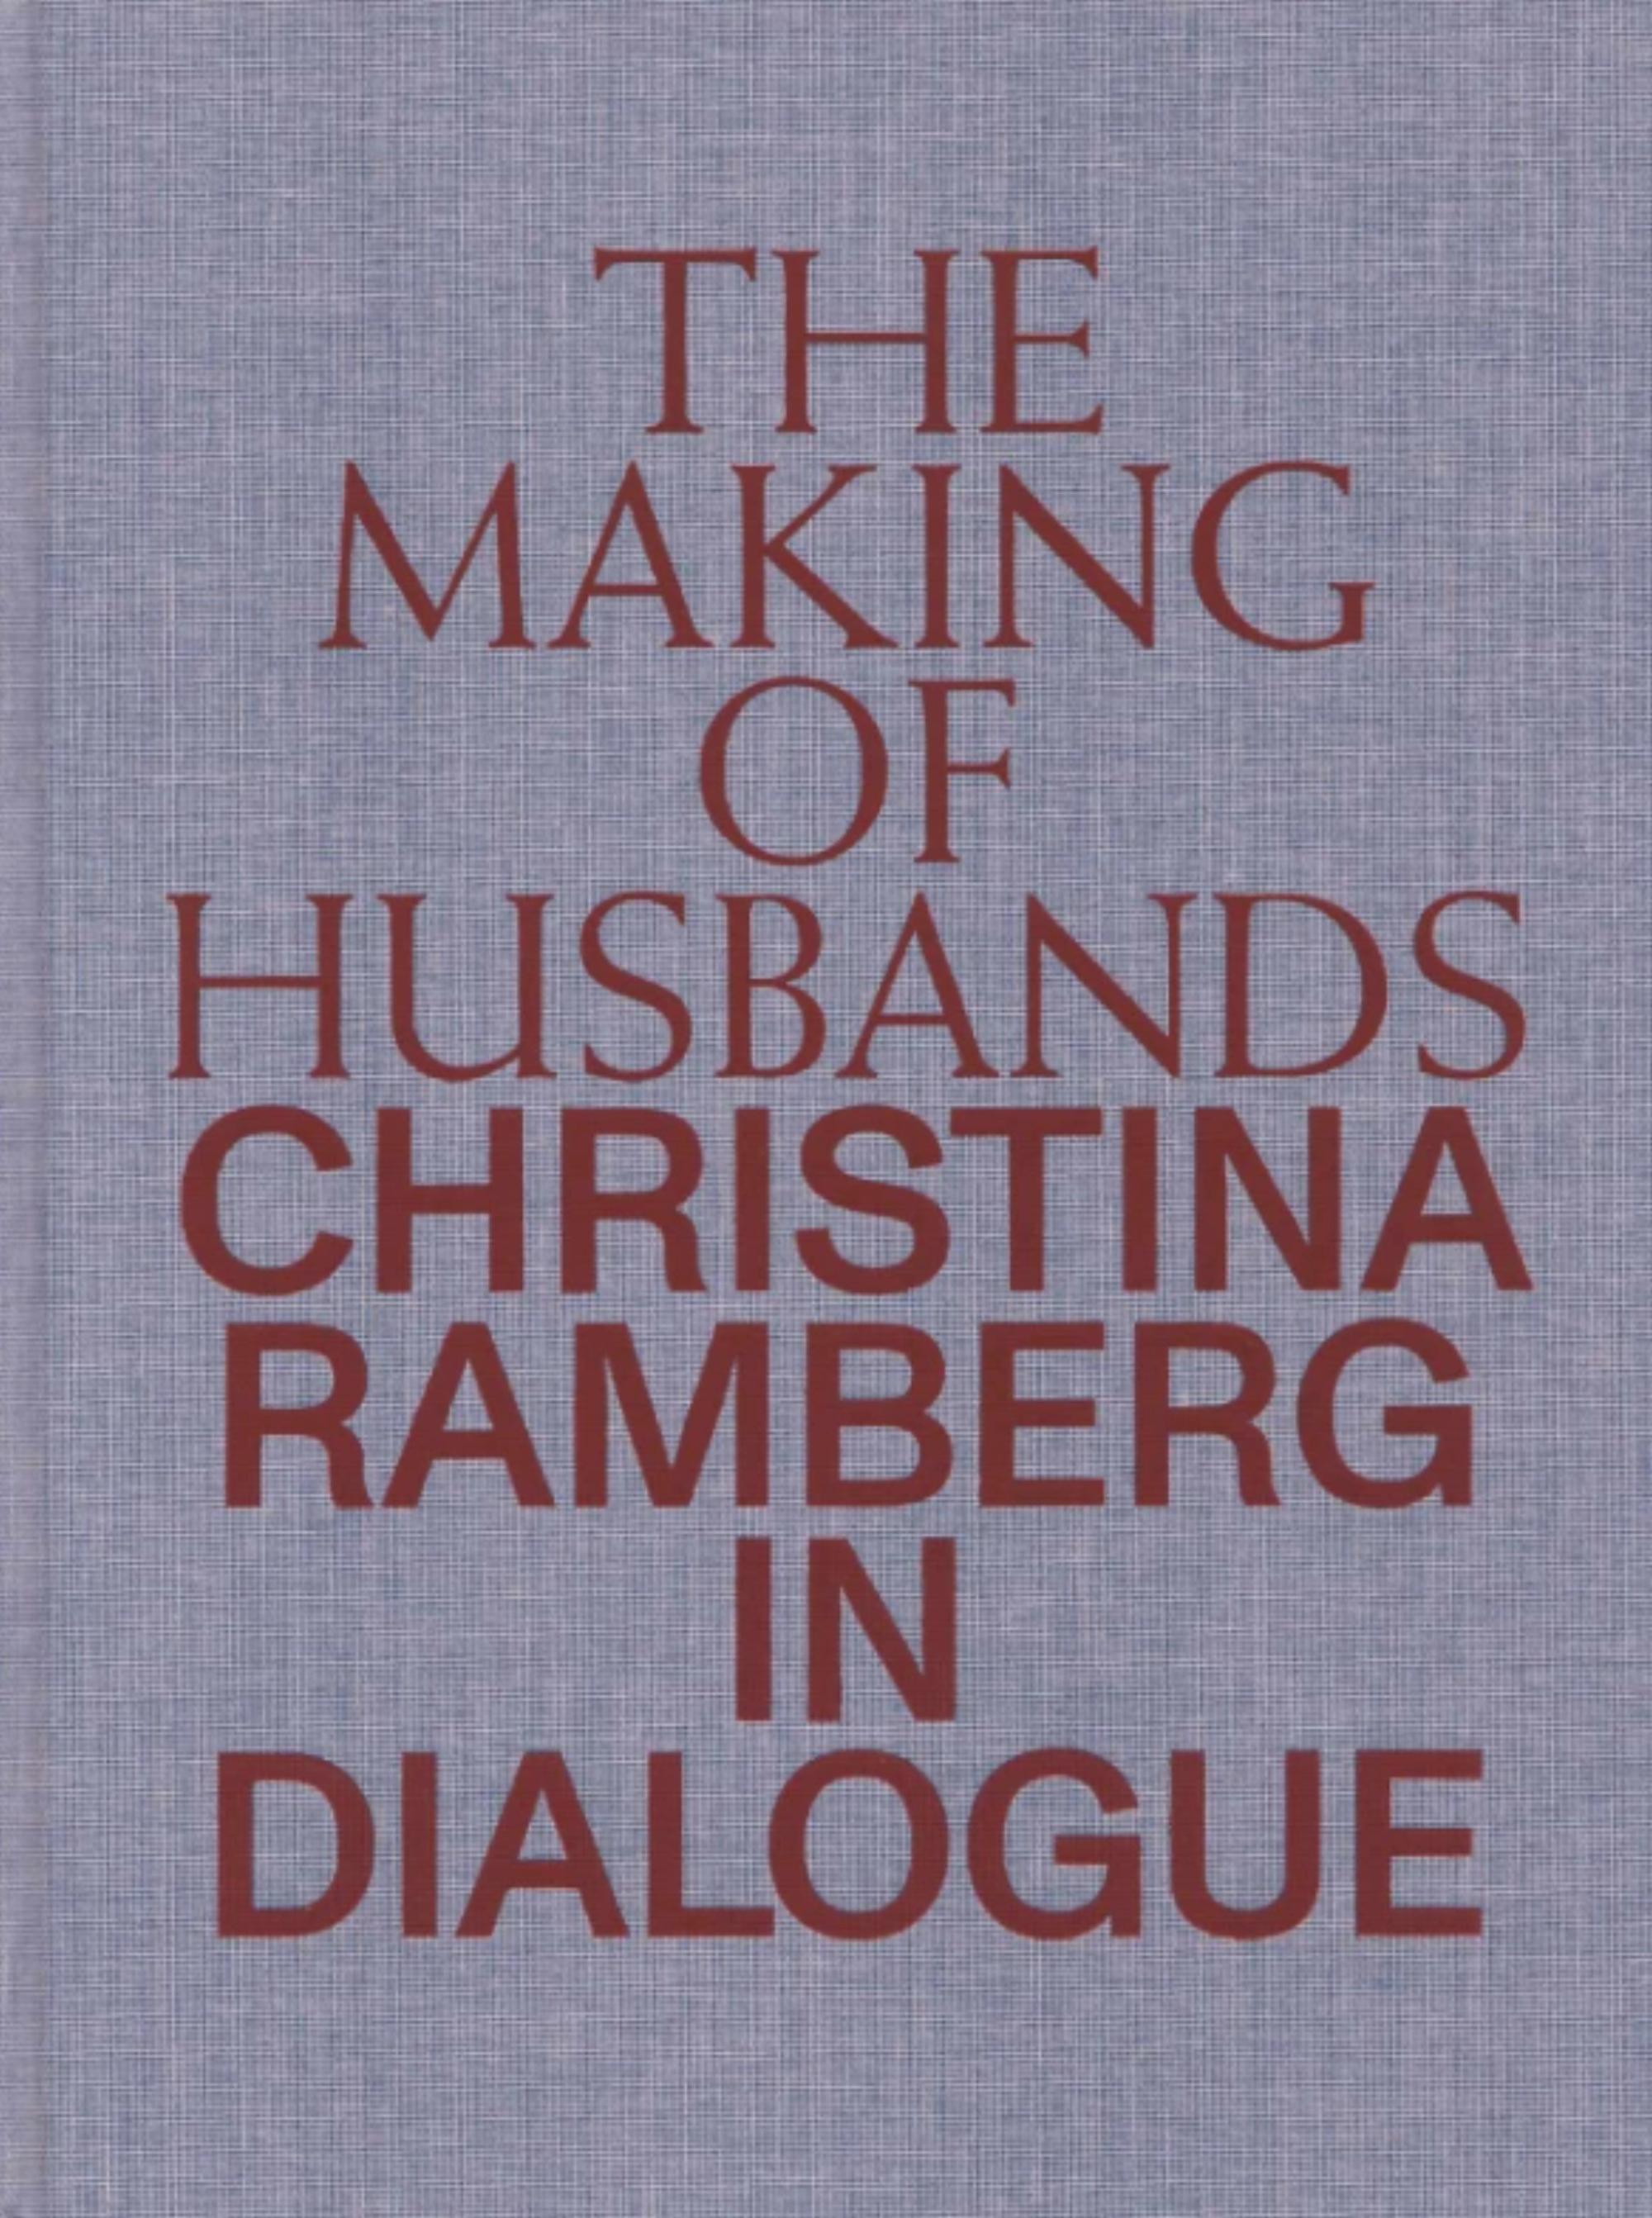 Book cover on plain background with title of The Making of Husbands. Christina Ramberg in Dialogue